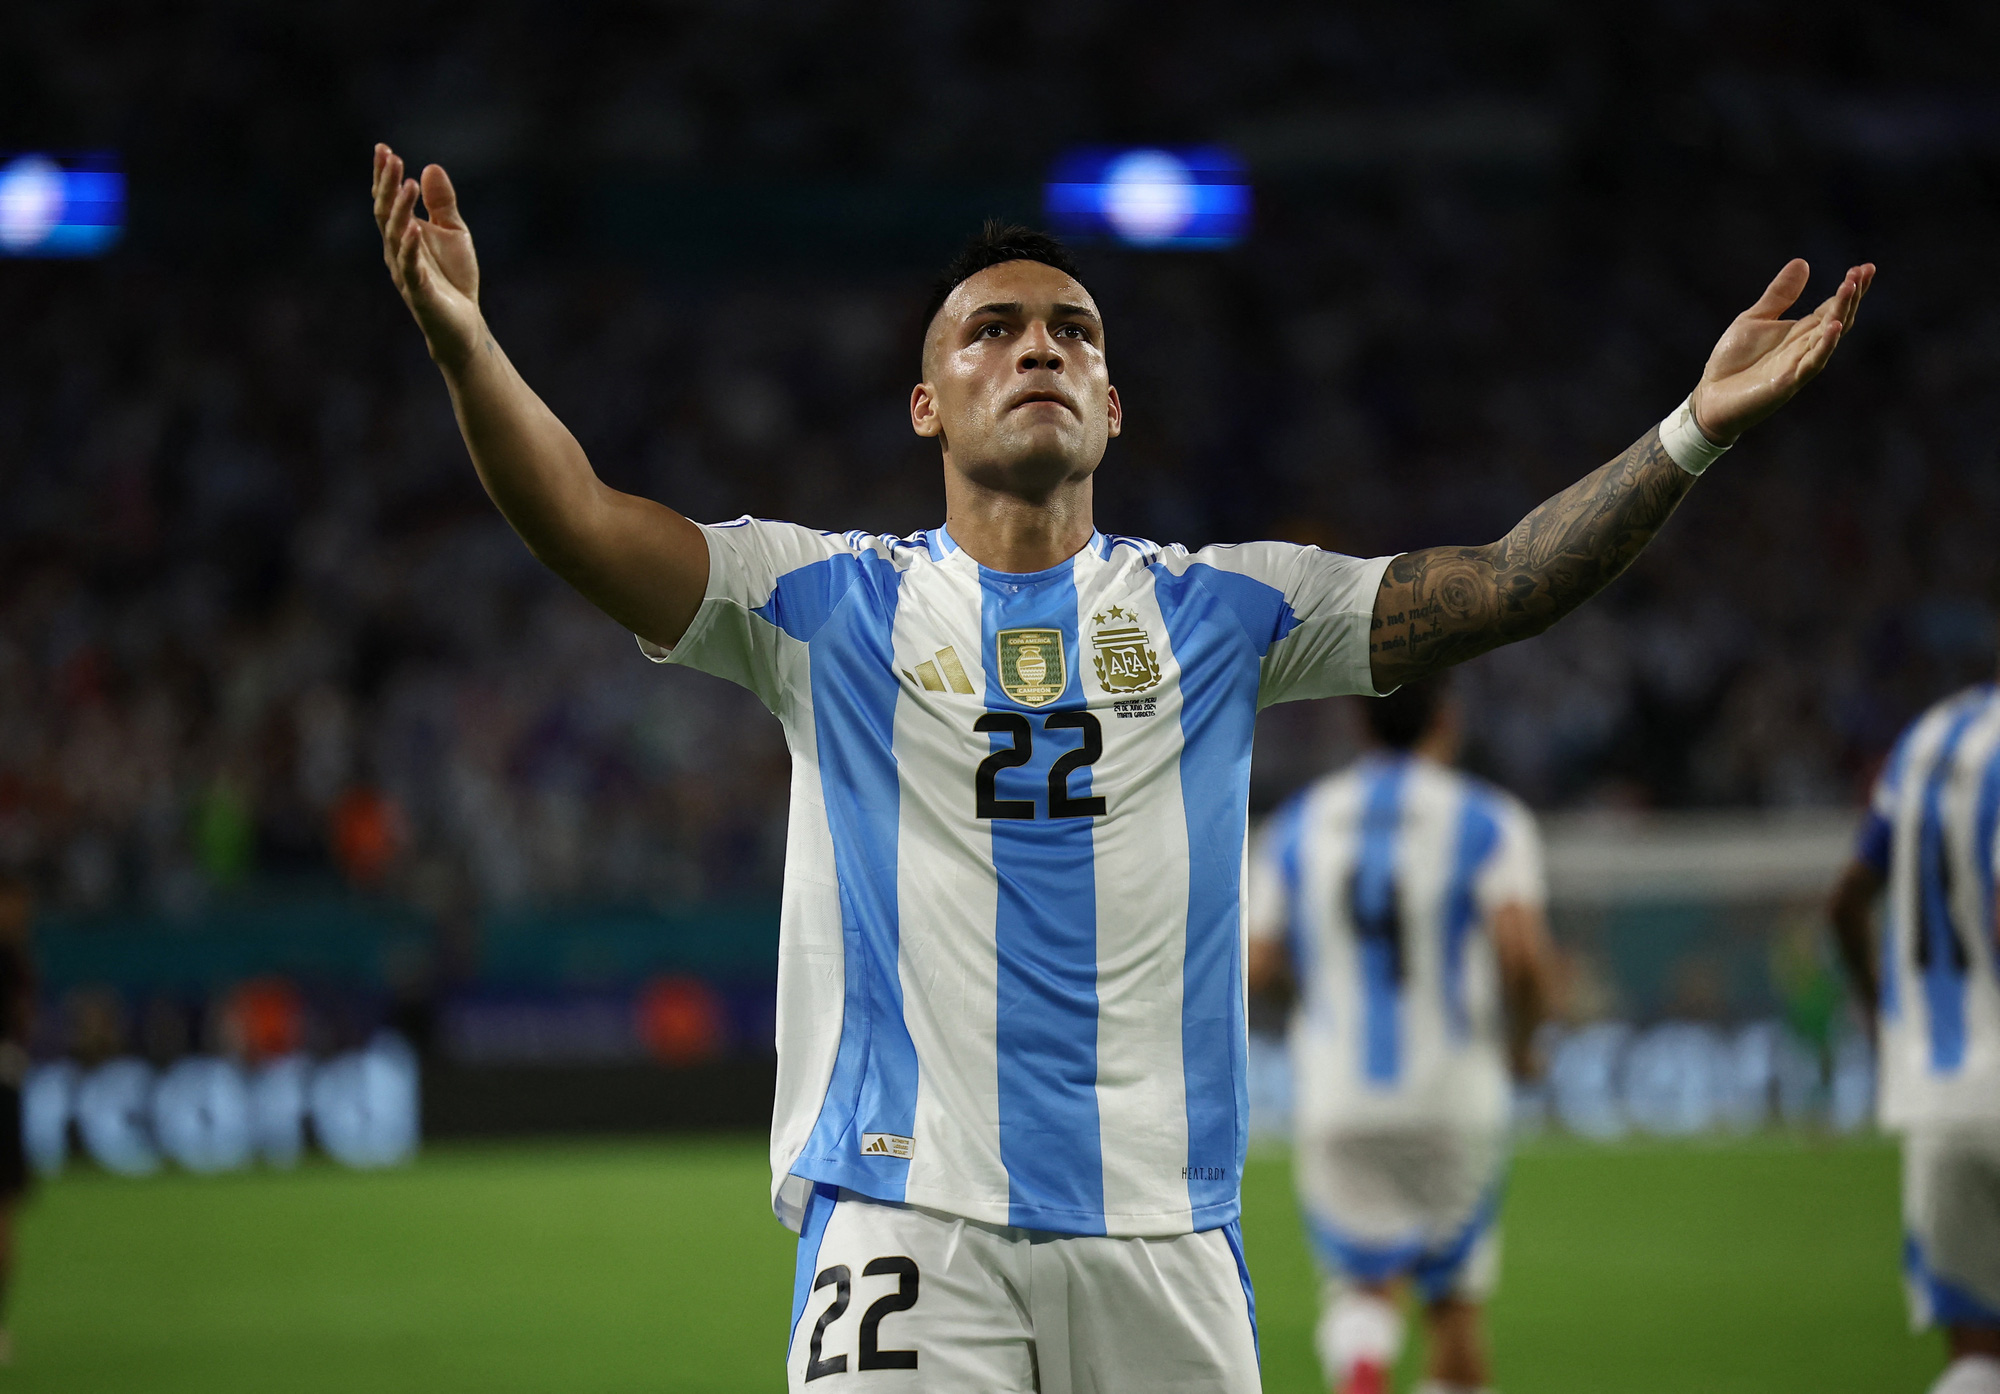 Lautaro Martinez scored twice to help Argentina win all matches in the group stage - Photo: Reuters